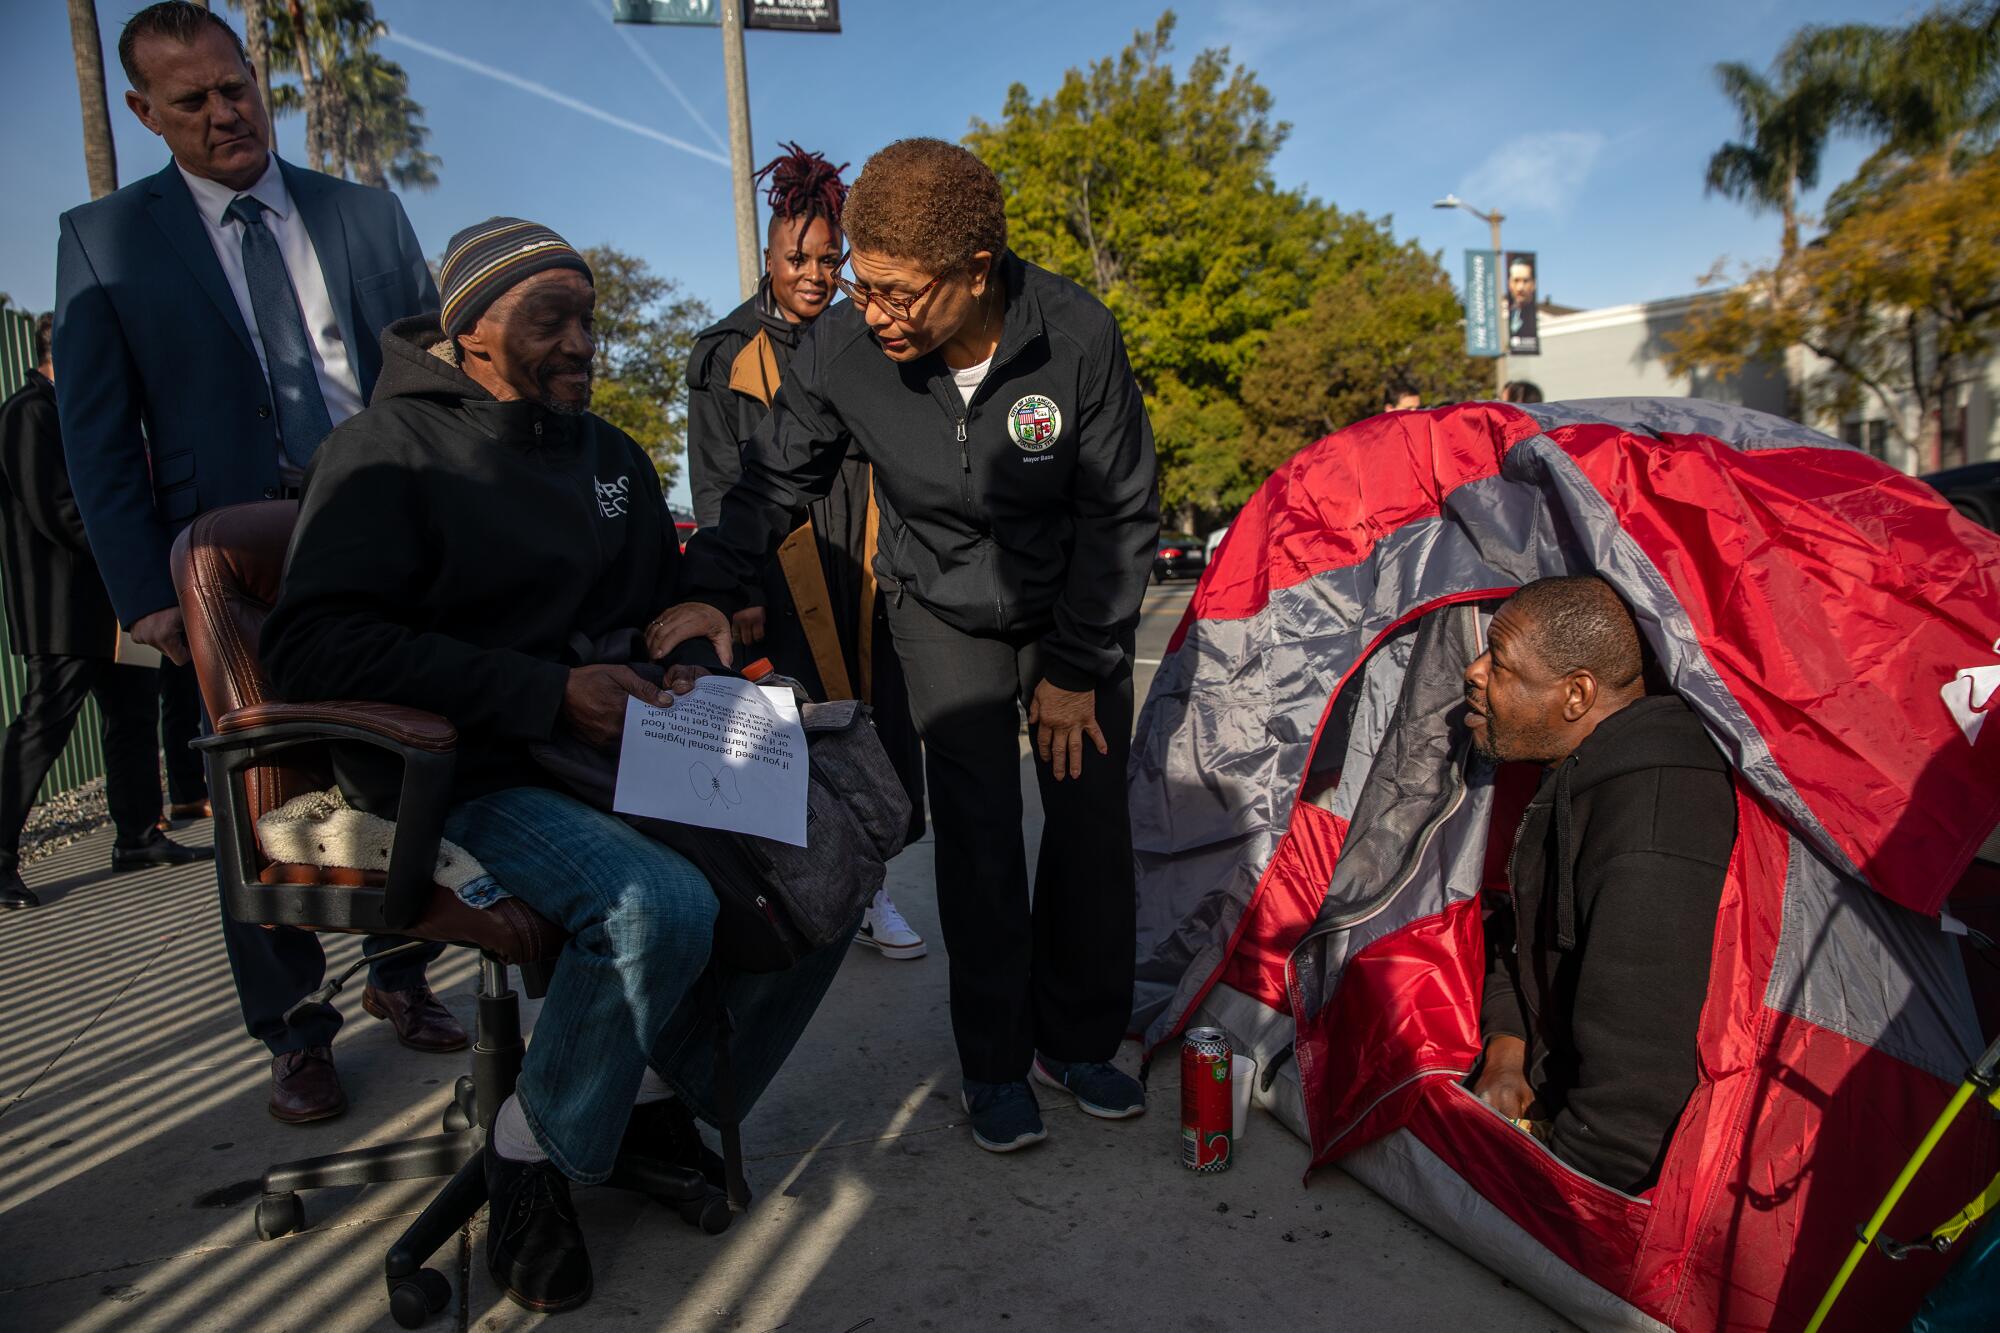 Mayor Karen Bass chats with homeless people living in tents outdoors.